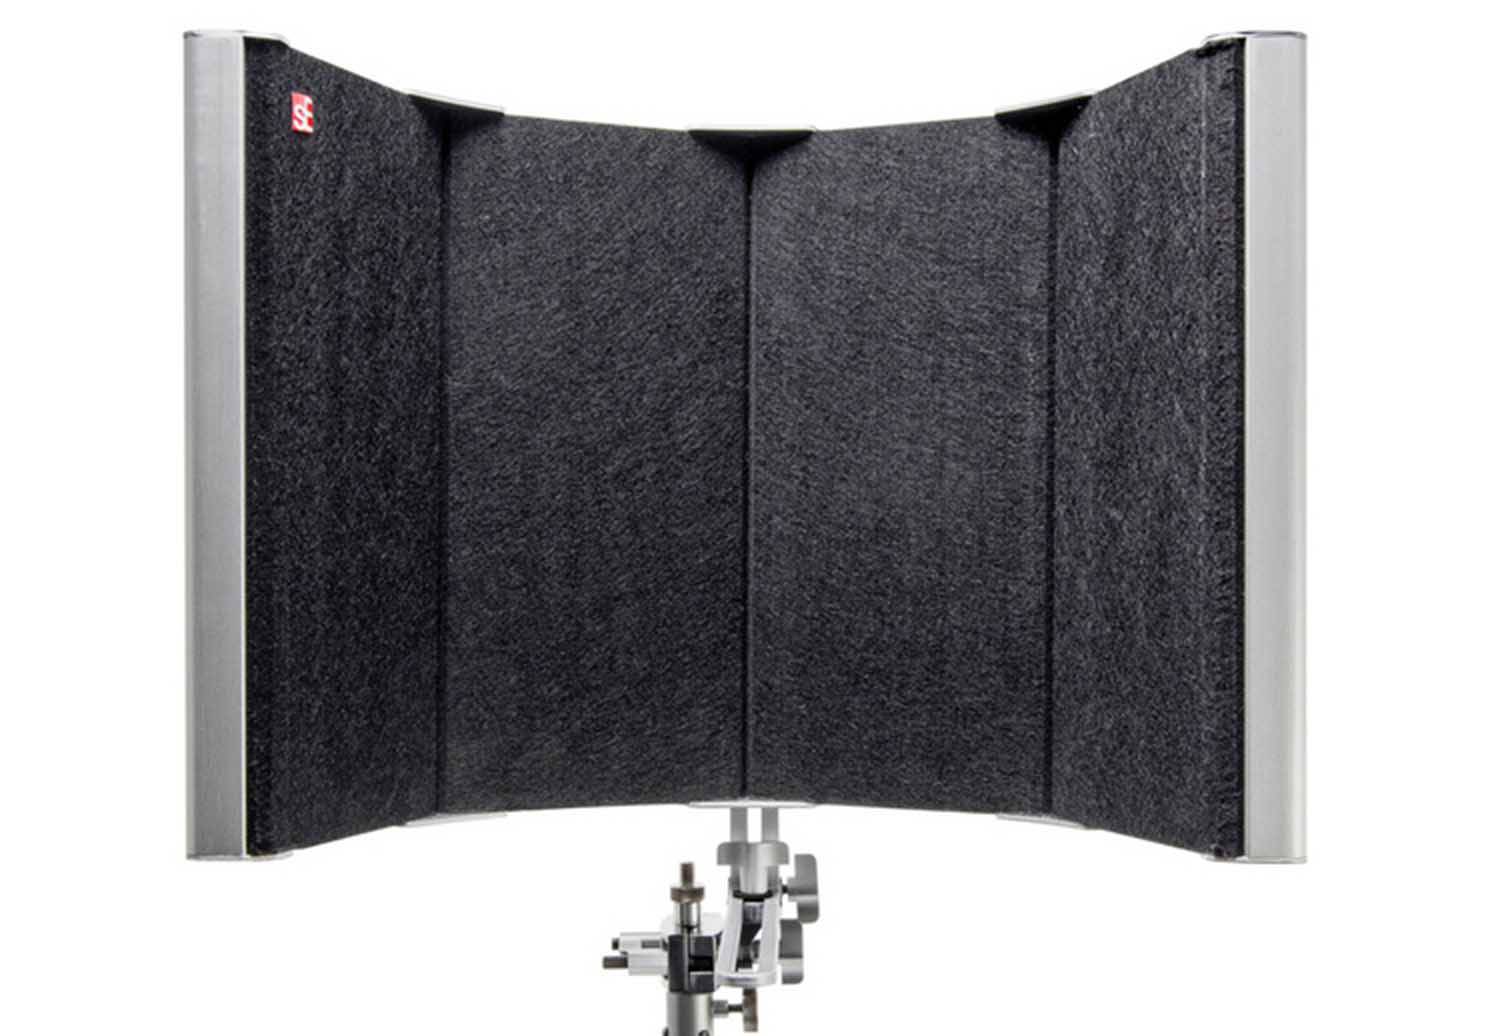 sE Electronics RF SPACE Specialized Portable Acoustic Control Environment Filter - Hollywood DJ